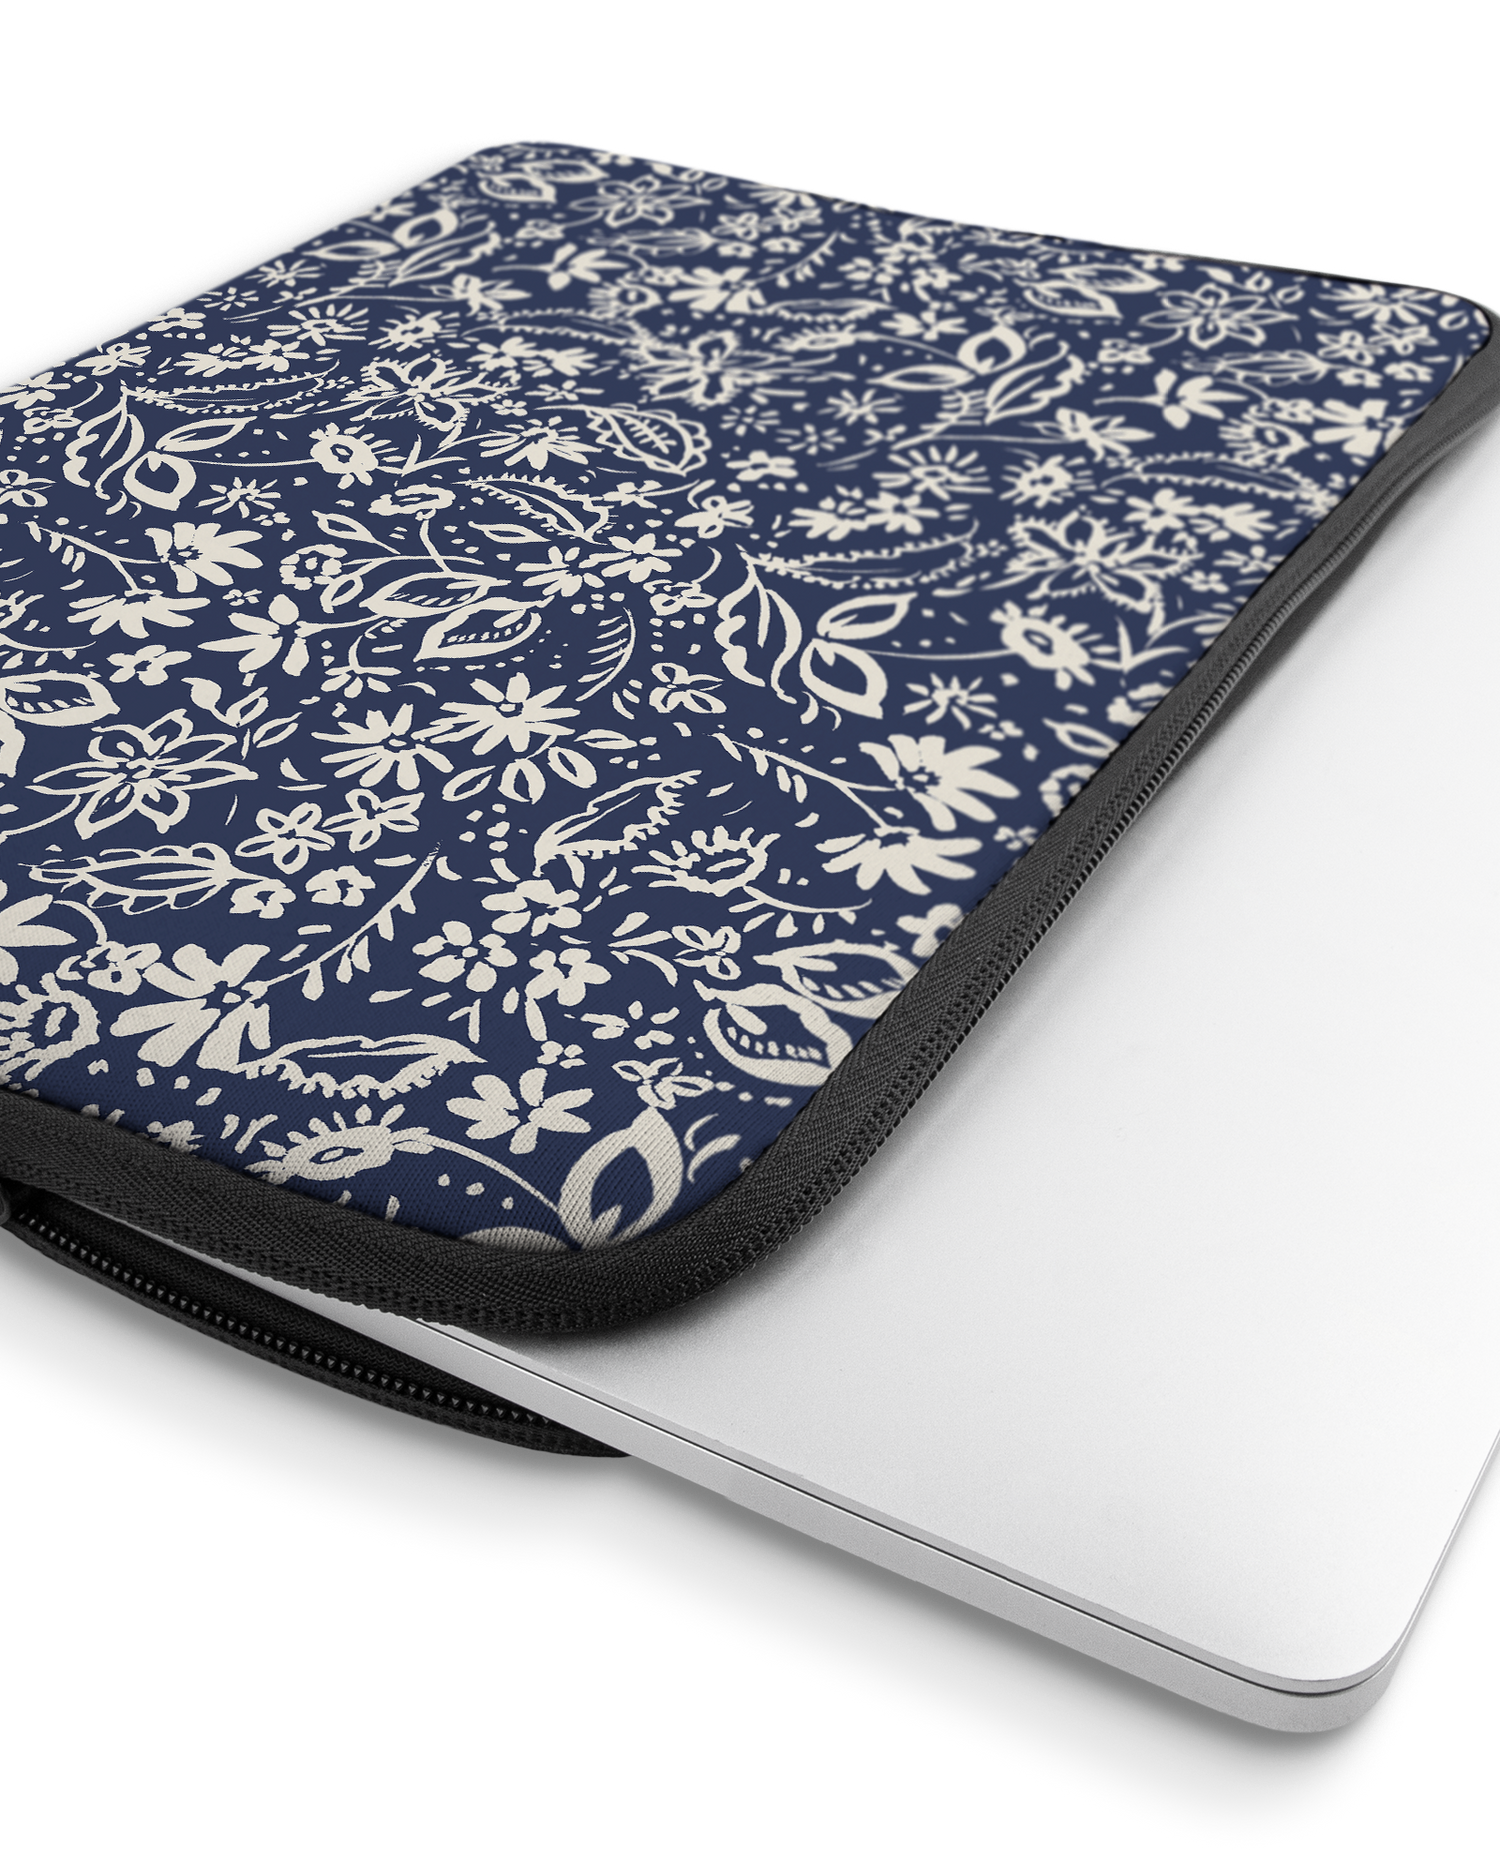 Ditsy Blue Paisley Laptop Case 16 inch with device inside